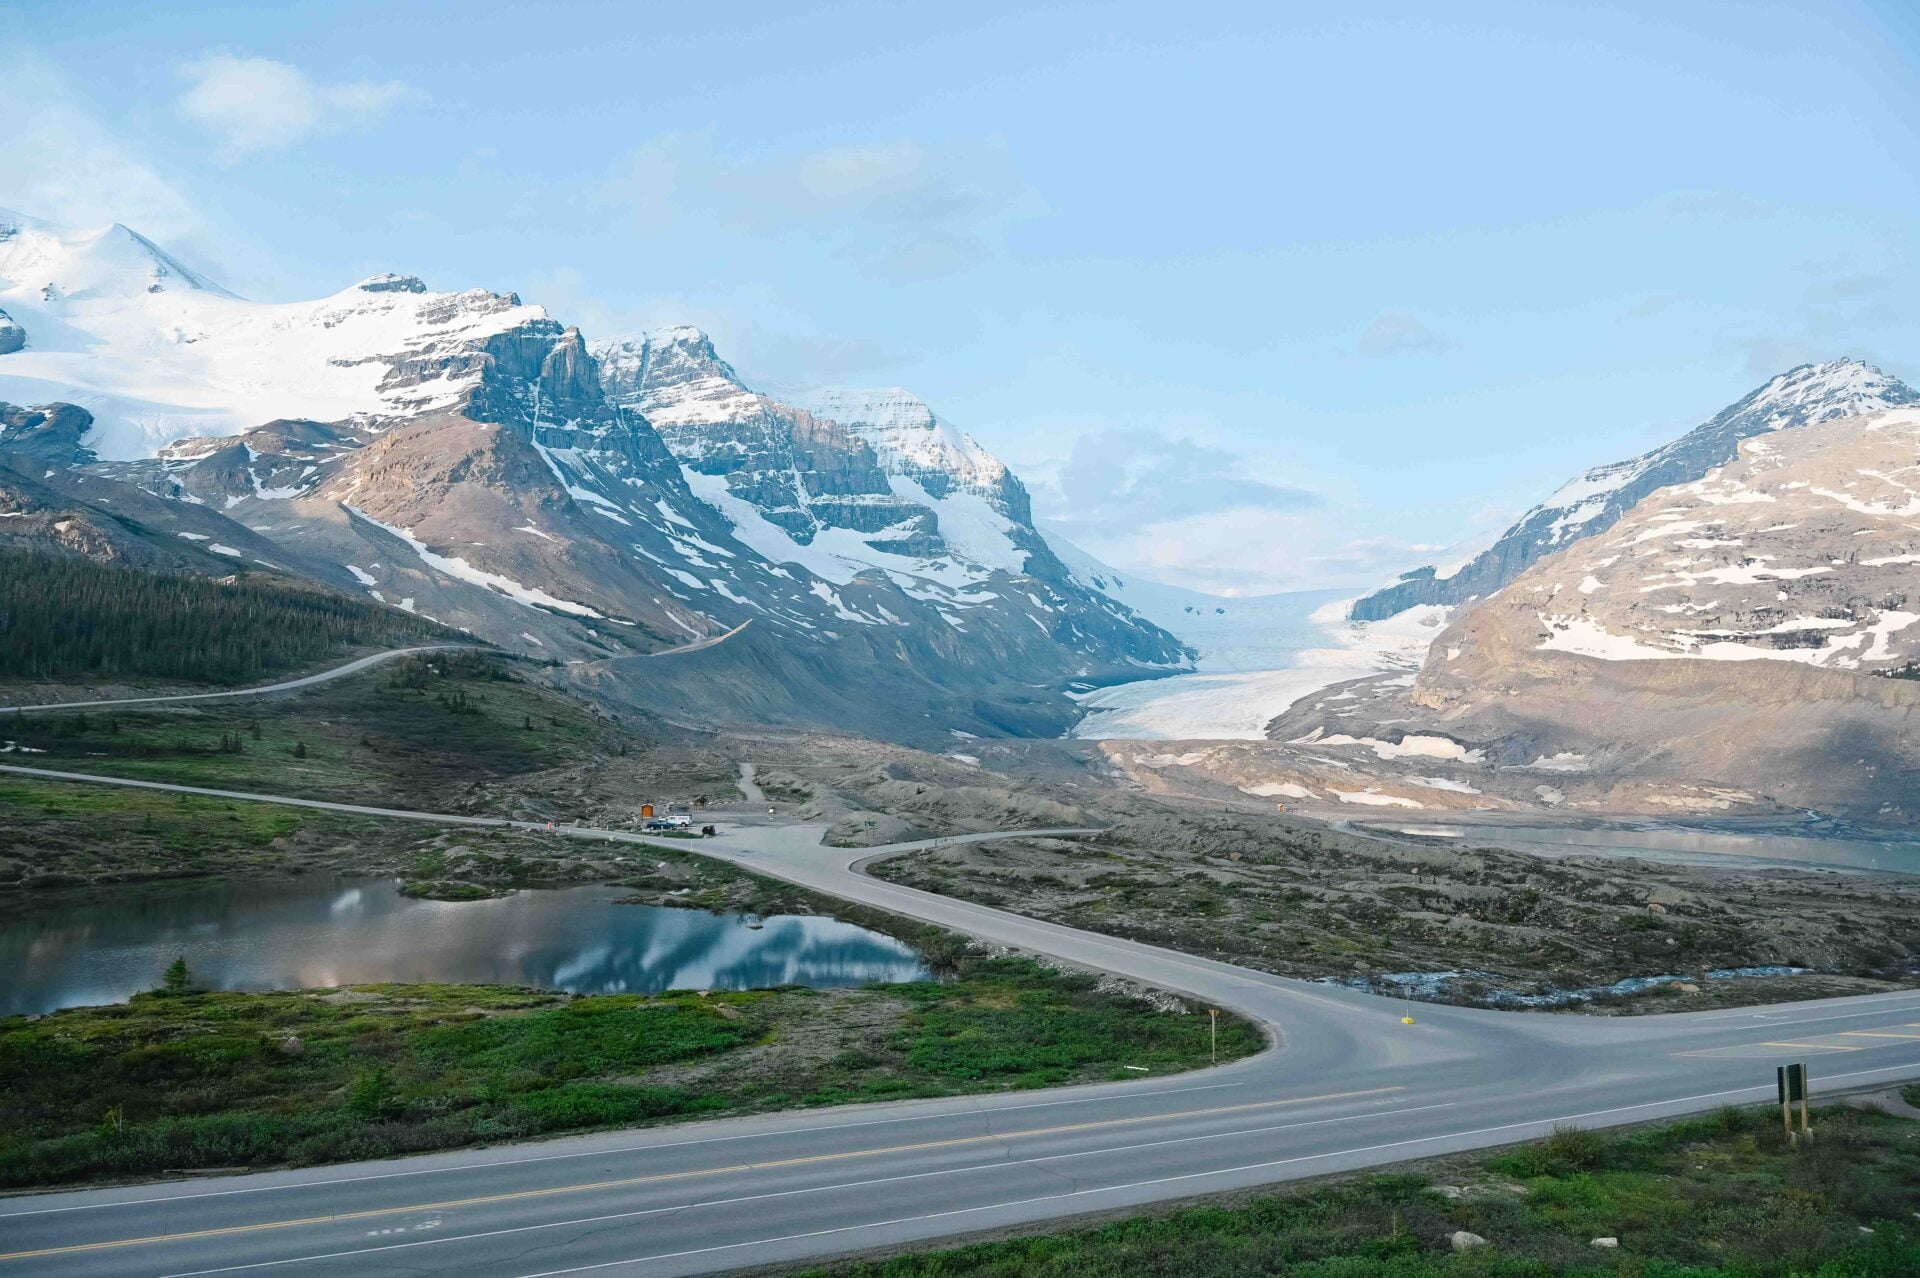 view of the athabasca glacier from across the highway with the mountains in the background